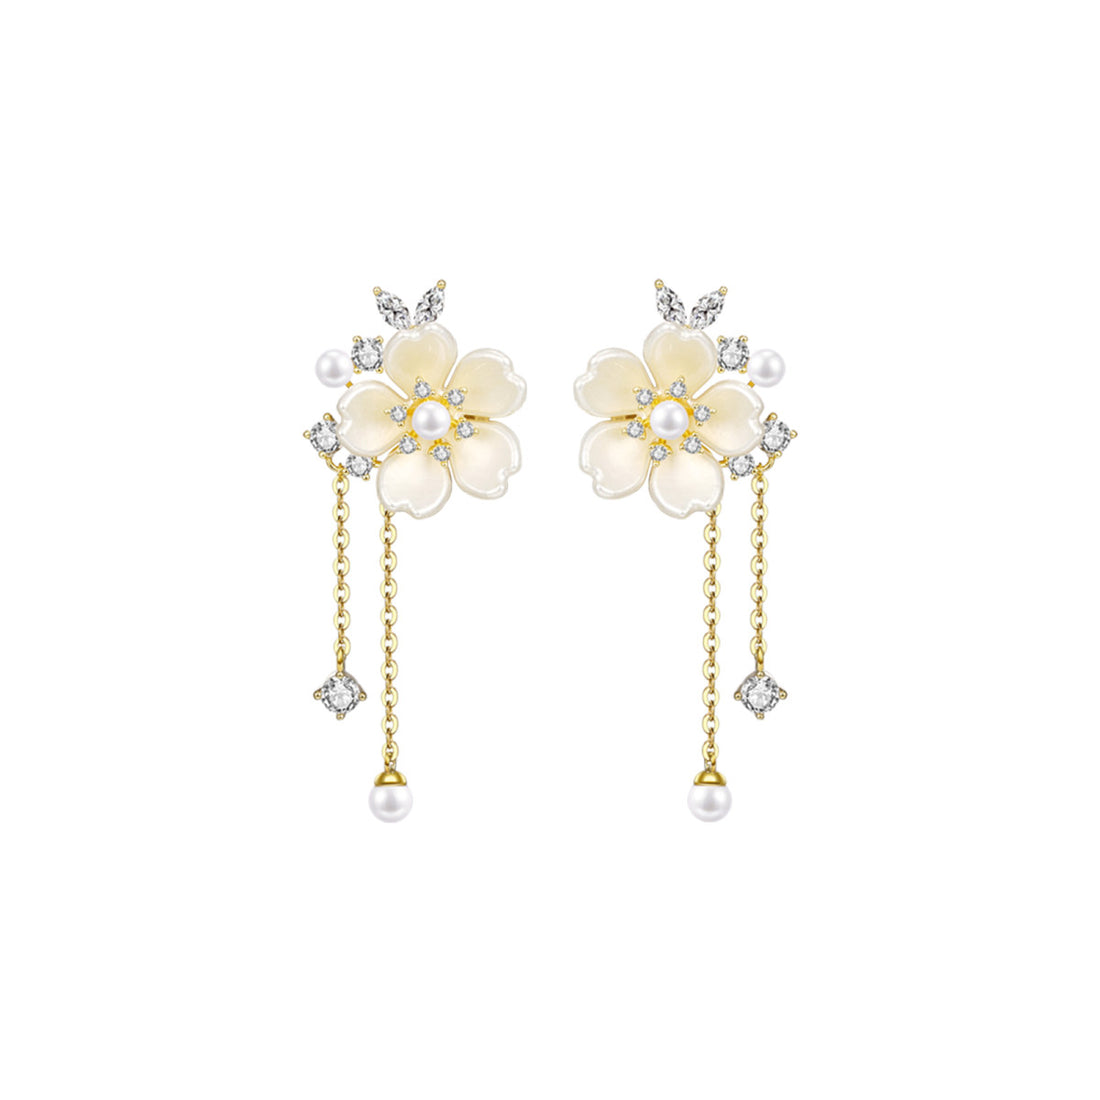 Exquisite Blossom Gold Earrings